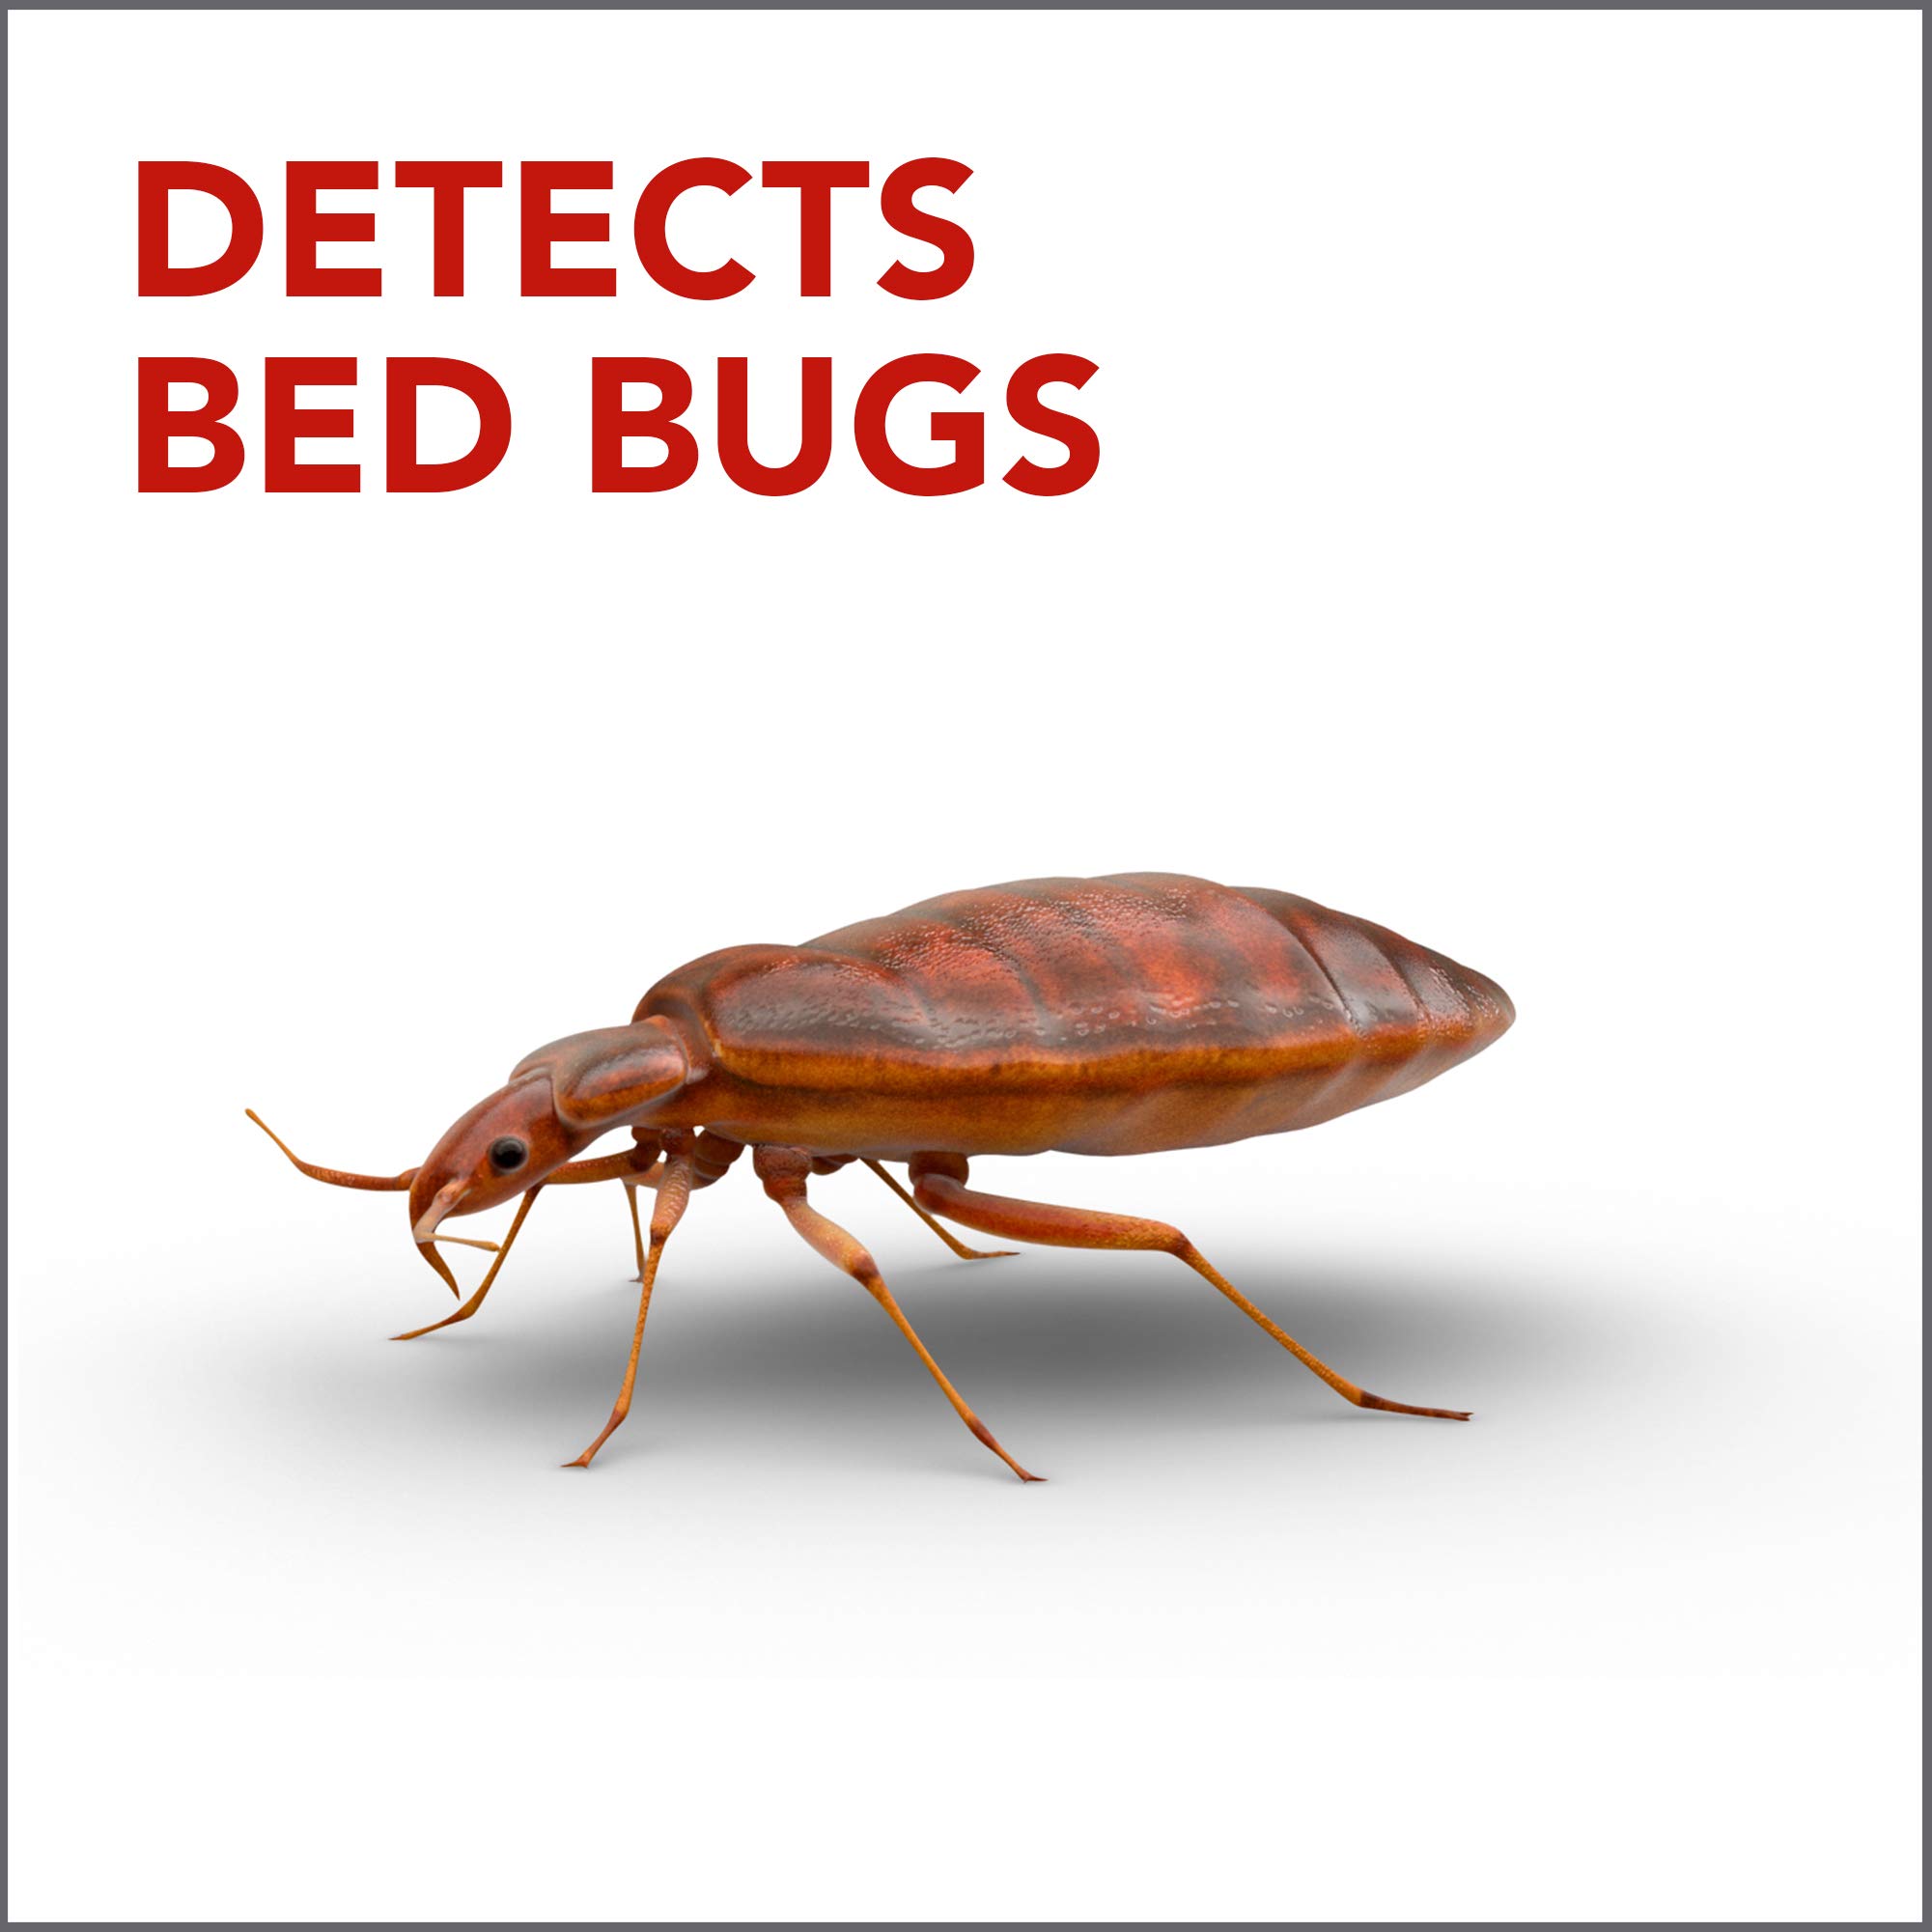 Raid Bed Bug Detector and Trap, For Indoor Use, 4 Count